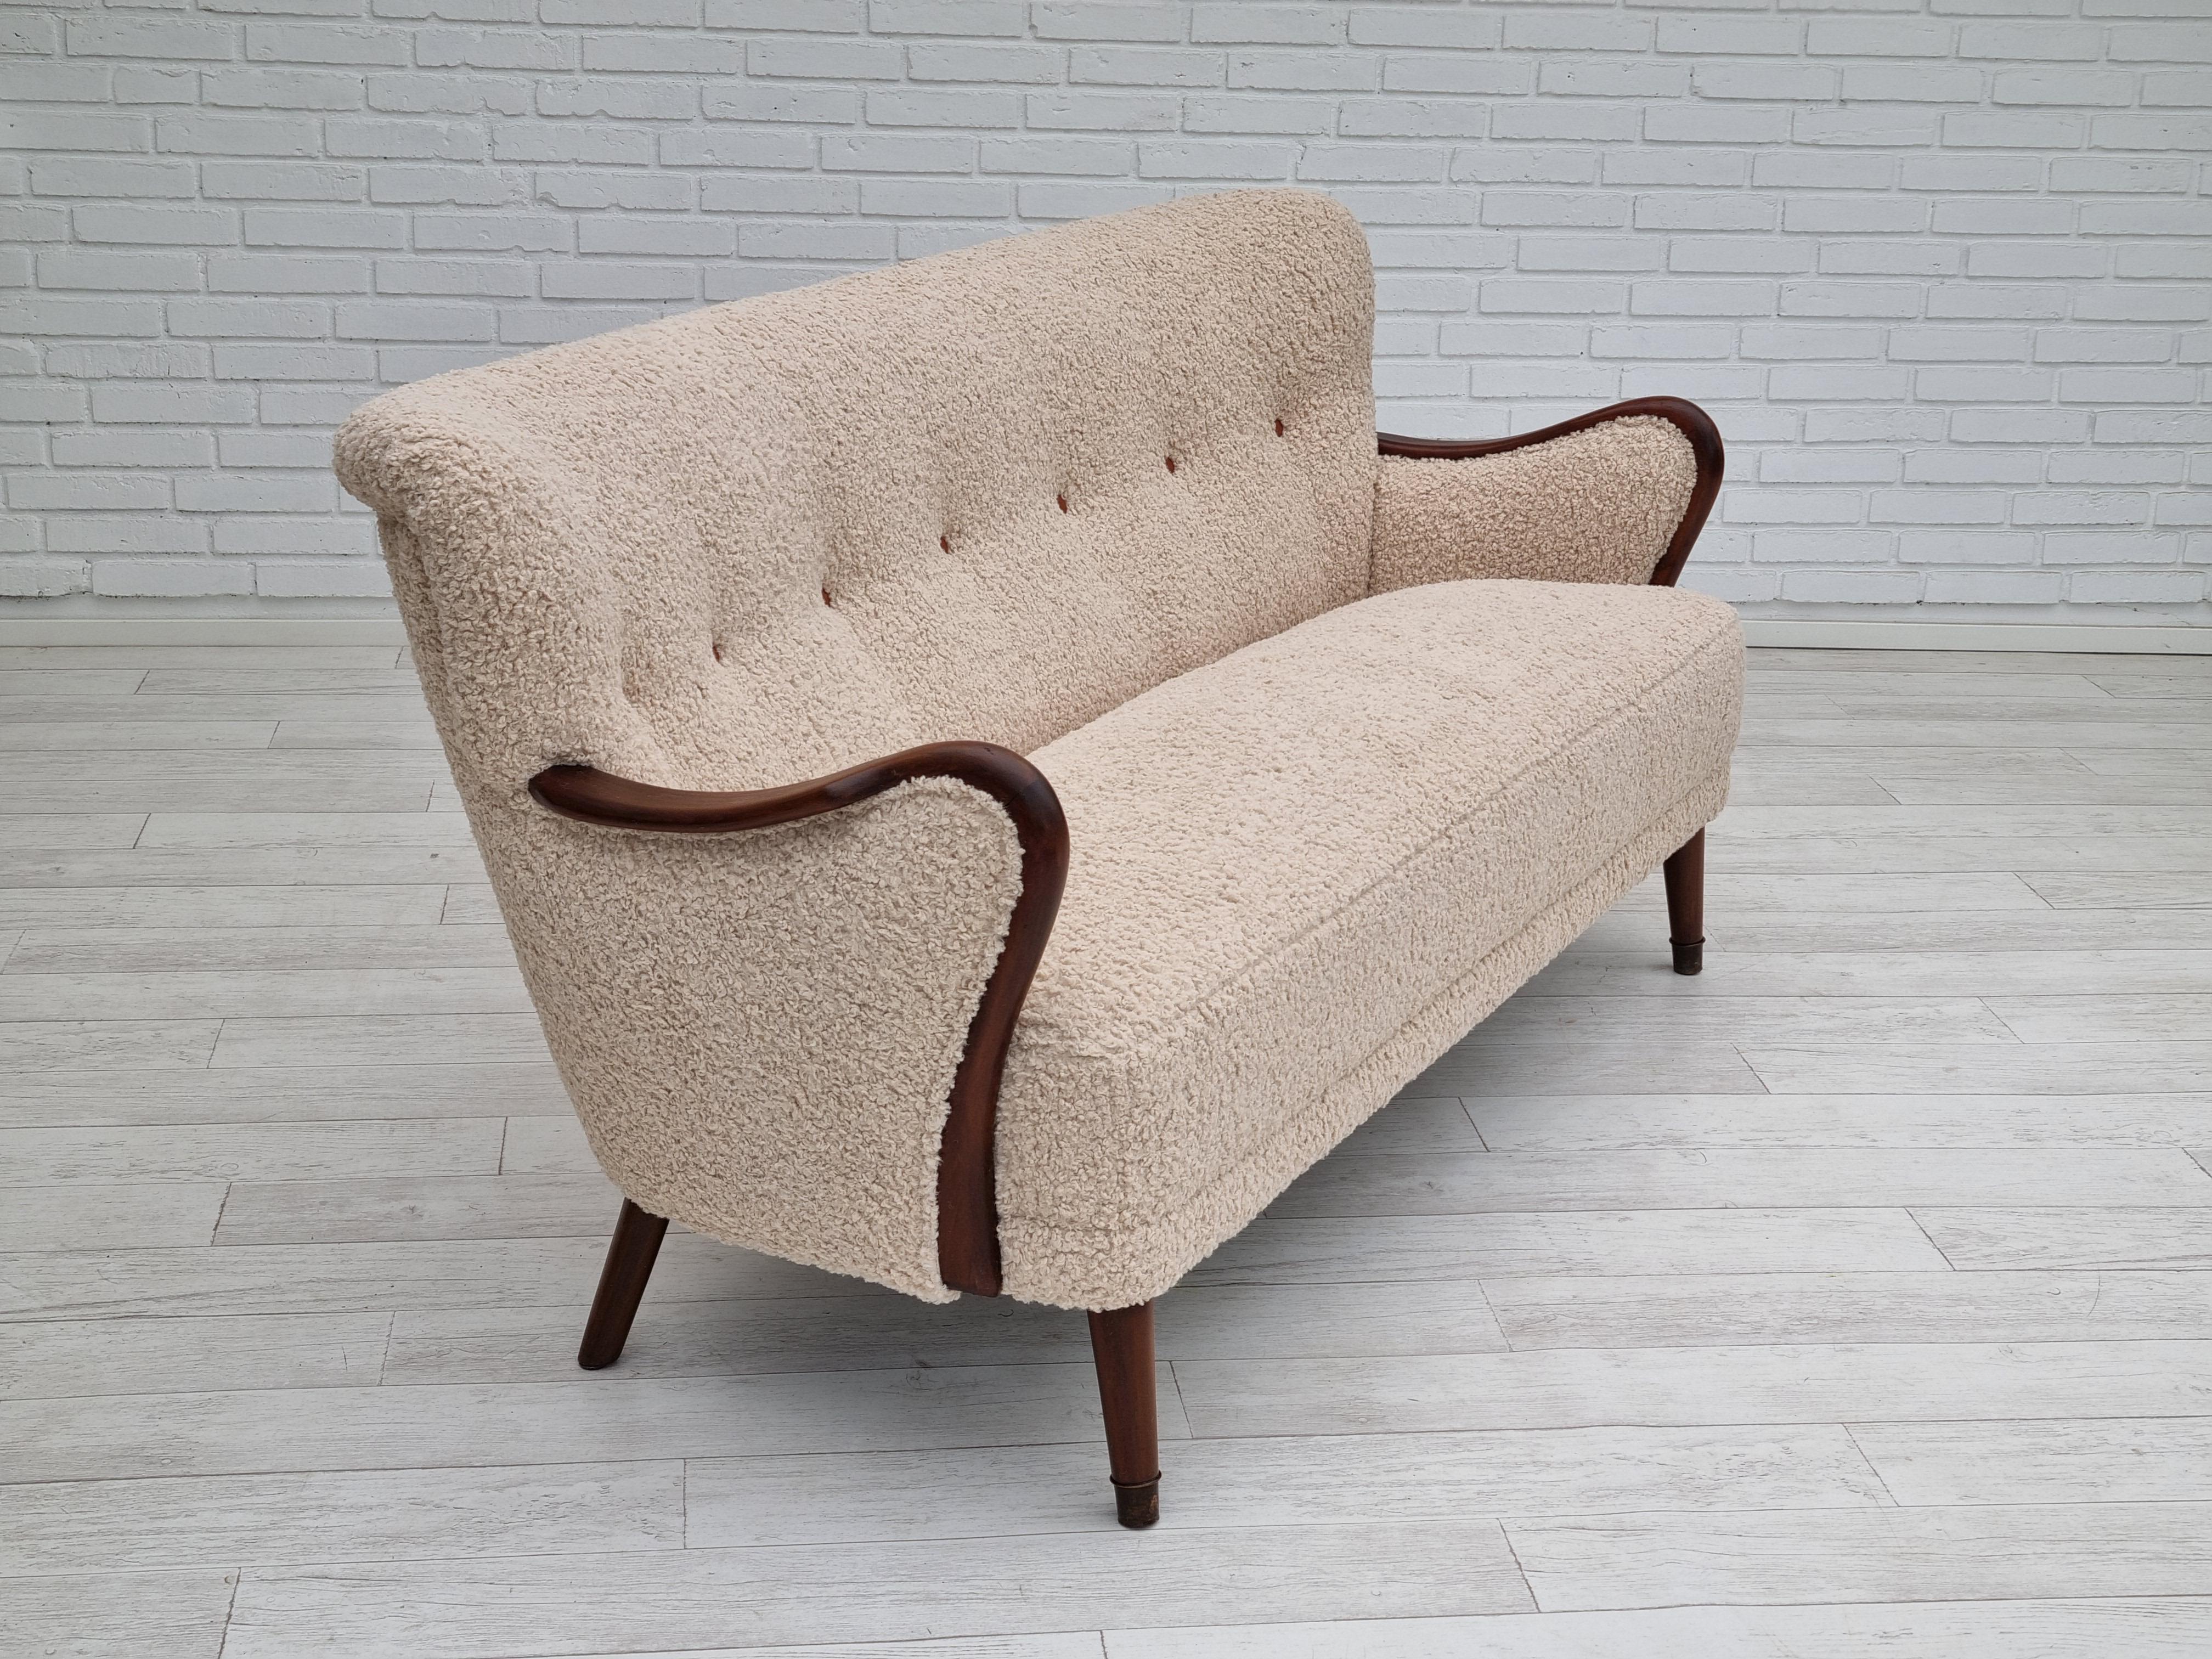 60s, Danish design by Alfred Christensen. Refurbished 3-pers. sofa. Upholstered in quality lambskin imitation. Camel-brown leather buttons. Beech wood legs and armrests. Original brass springs in the seat are kept. Manufactured by Danish furniture